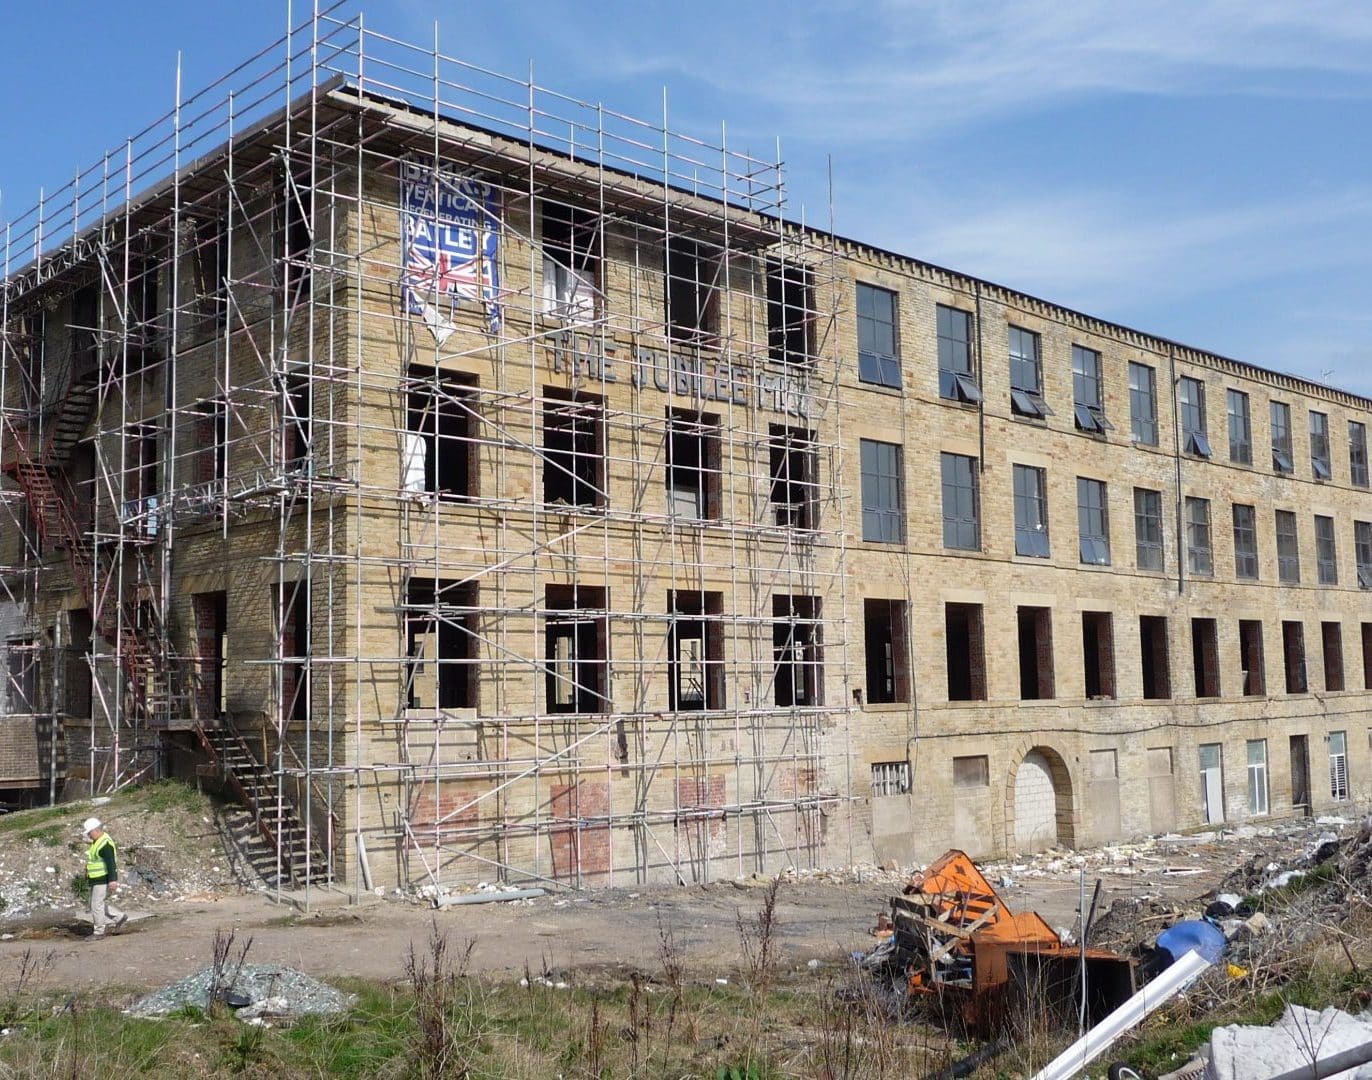 mill conversion in progress with scaffolding